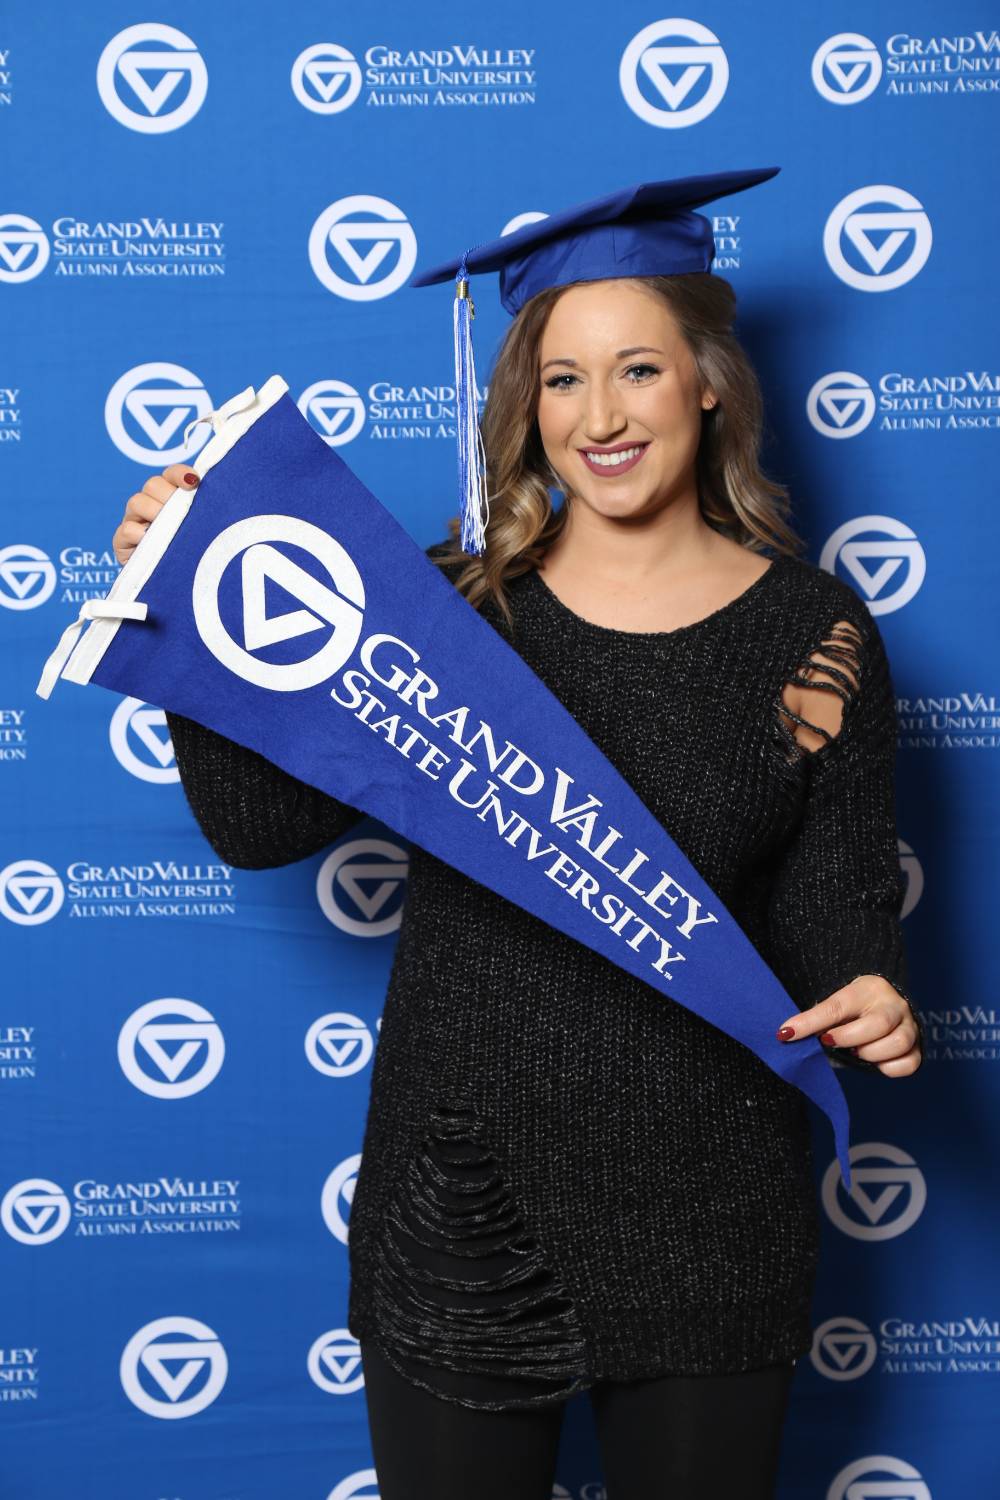 Upcoming graduate poses with GV flag at Gradfest